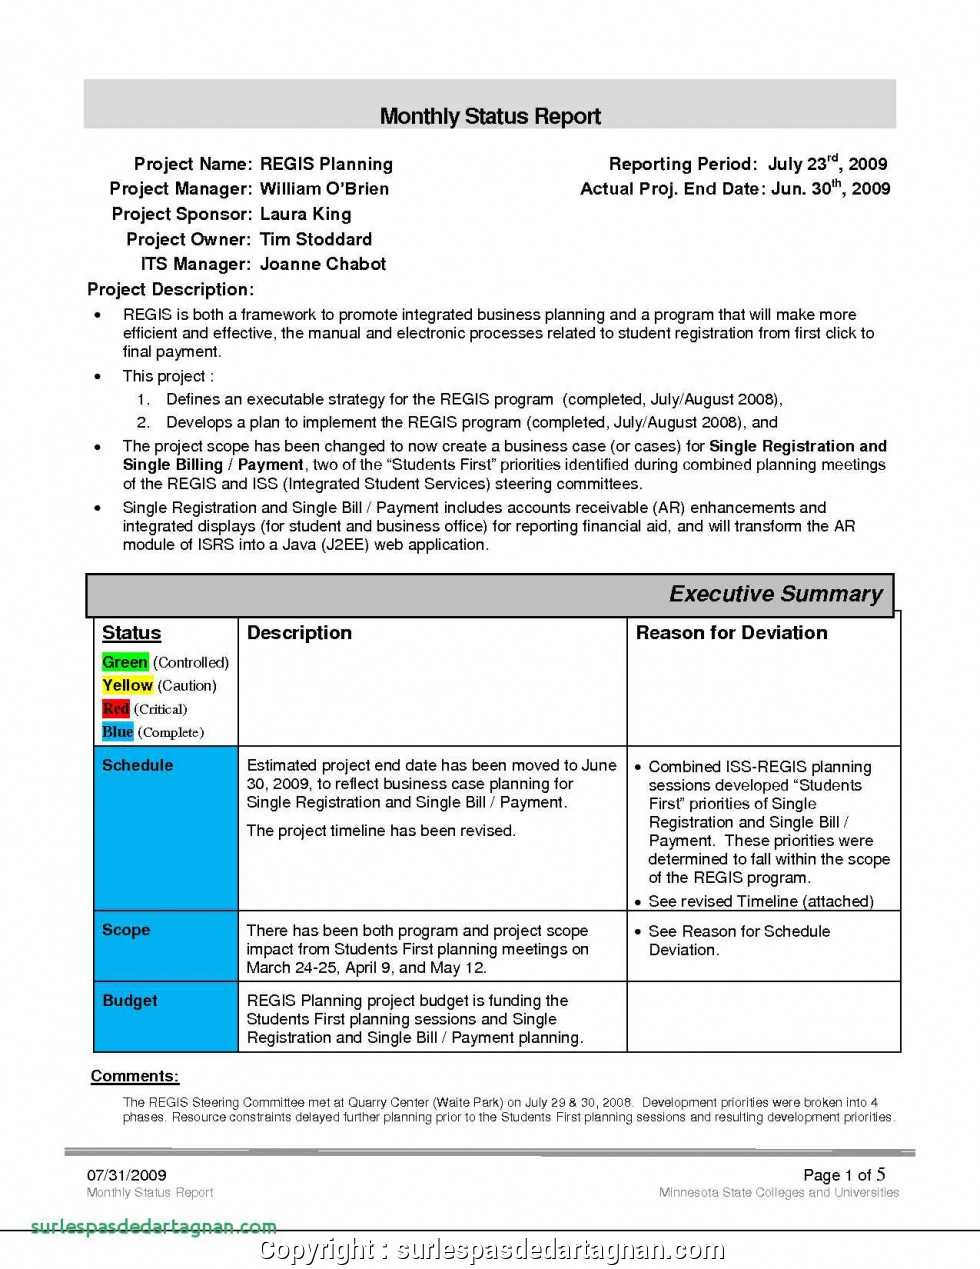 Sales Manager Monthly Report Templates - Atlantaauctionco Intended For Sales Manager Monthly Report Templates